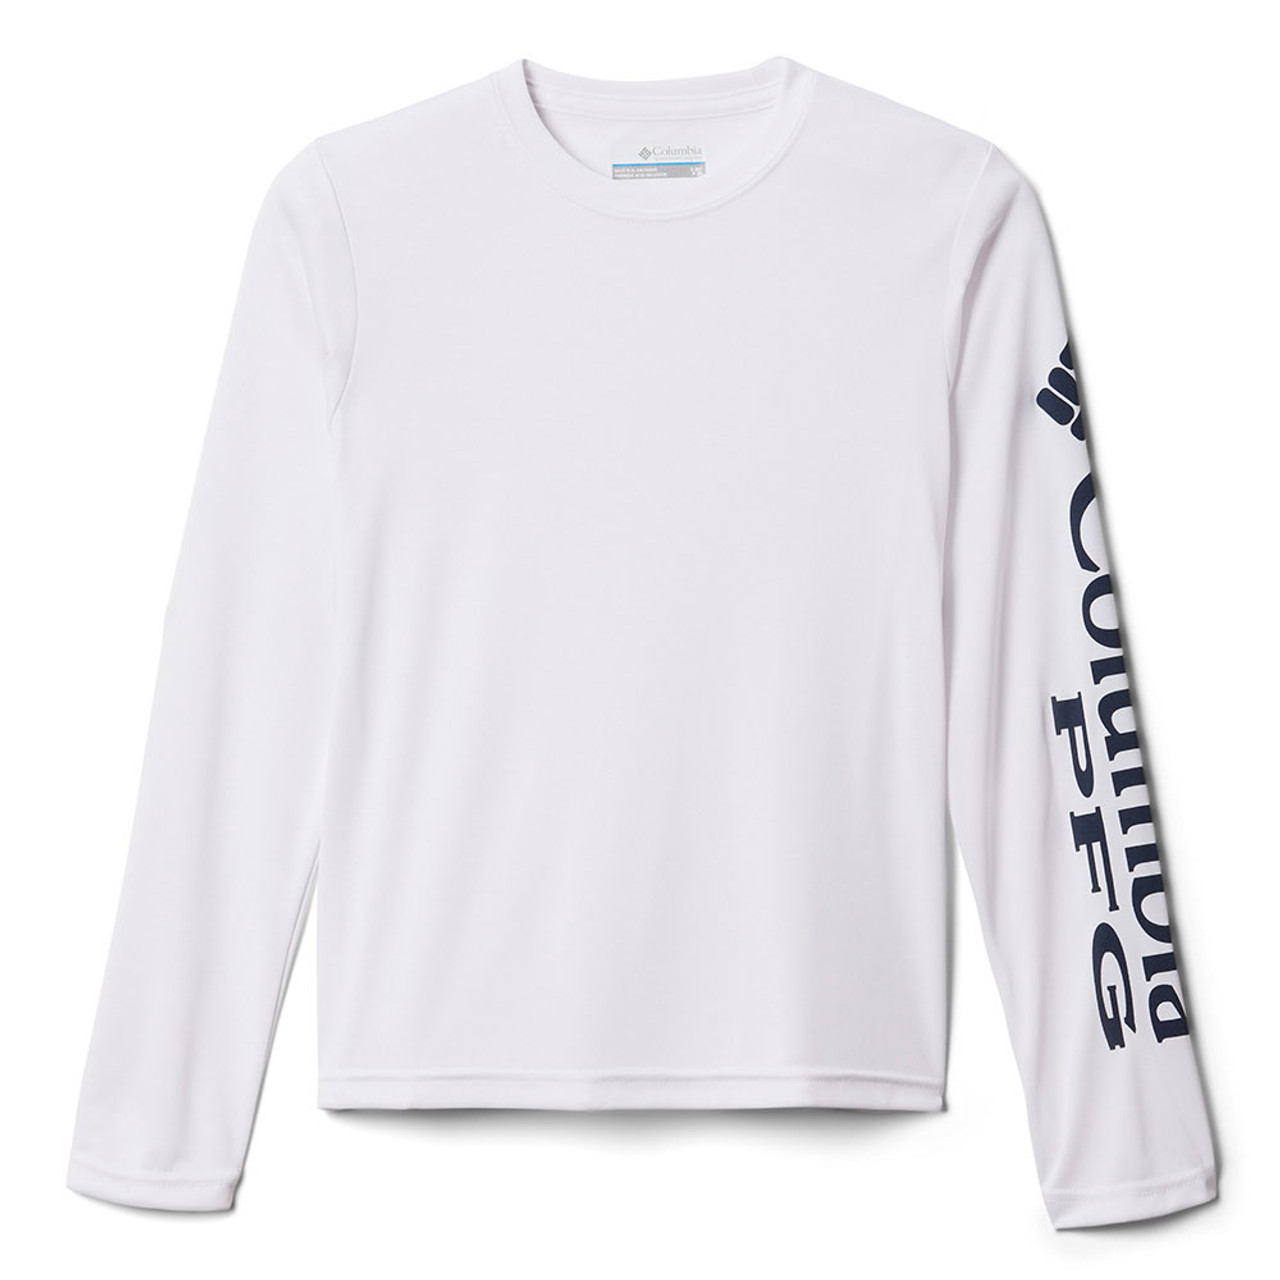 https://cdn11.bigcommerce.com/s-zut1msomd6/images/stencil/1280x1280/products/15722/245573/columbia-boys-long-sleeve-terminal-tackle-shirt-1541251-103white-white_collegiate-navy-logo-main__90791.1704396945.jpg?c=1